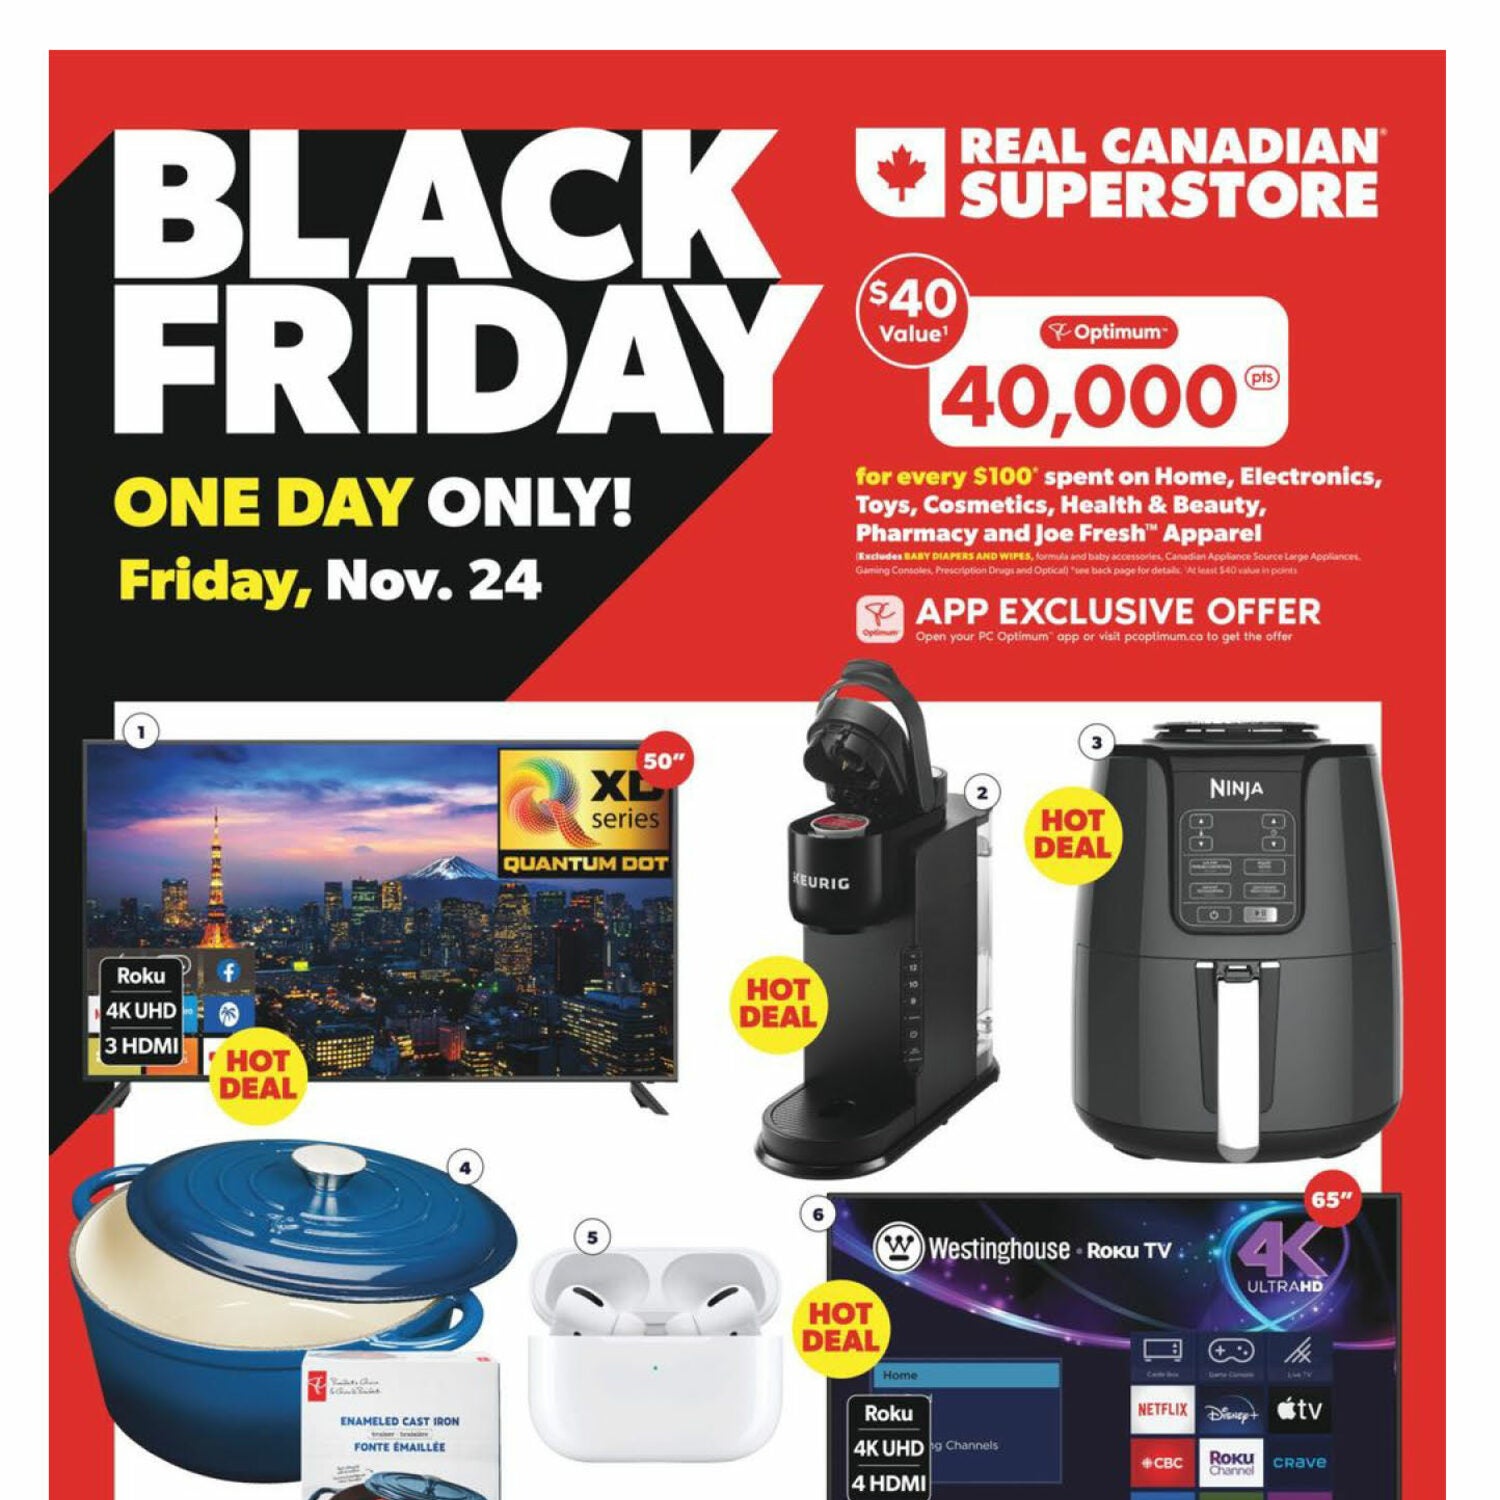 Real Canadian Superstore Weekly Flyer - Black Friday Deals (BC, AB